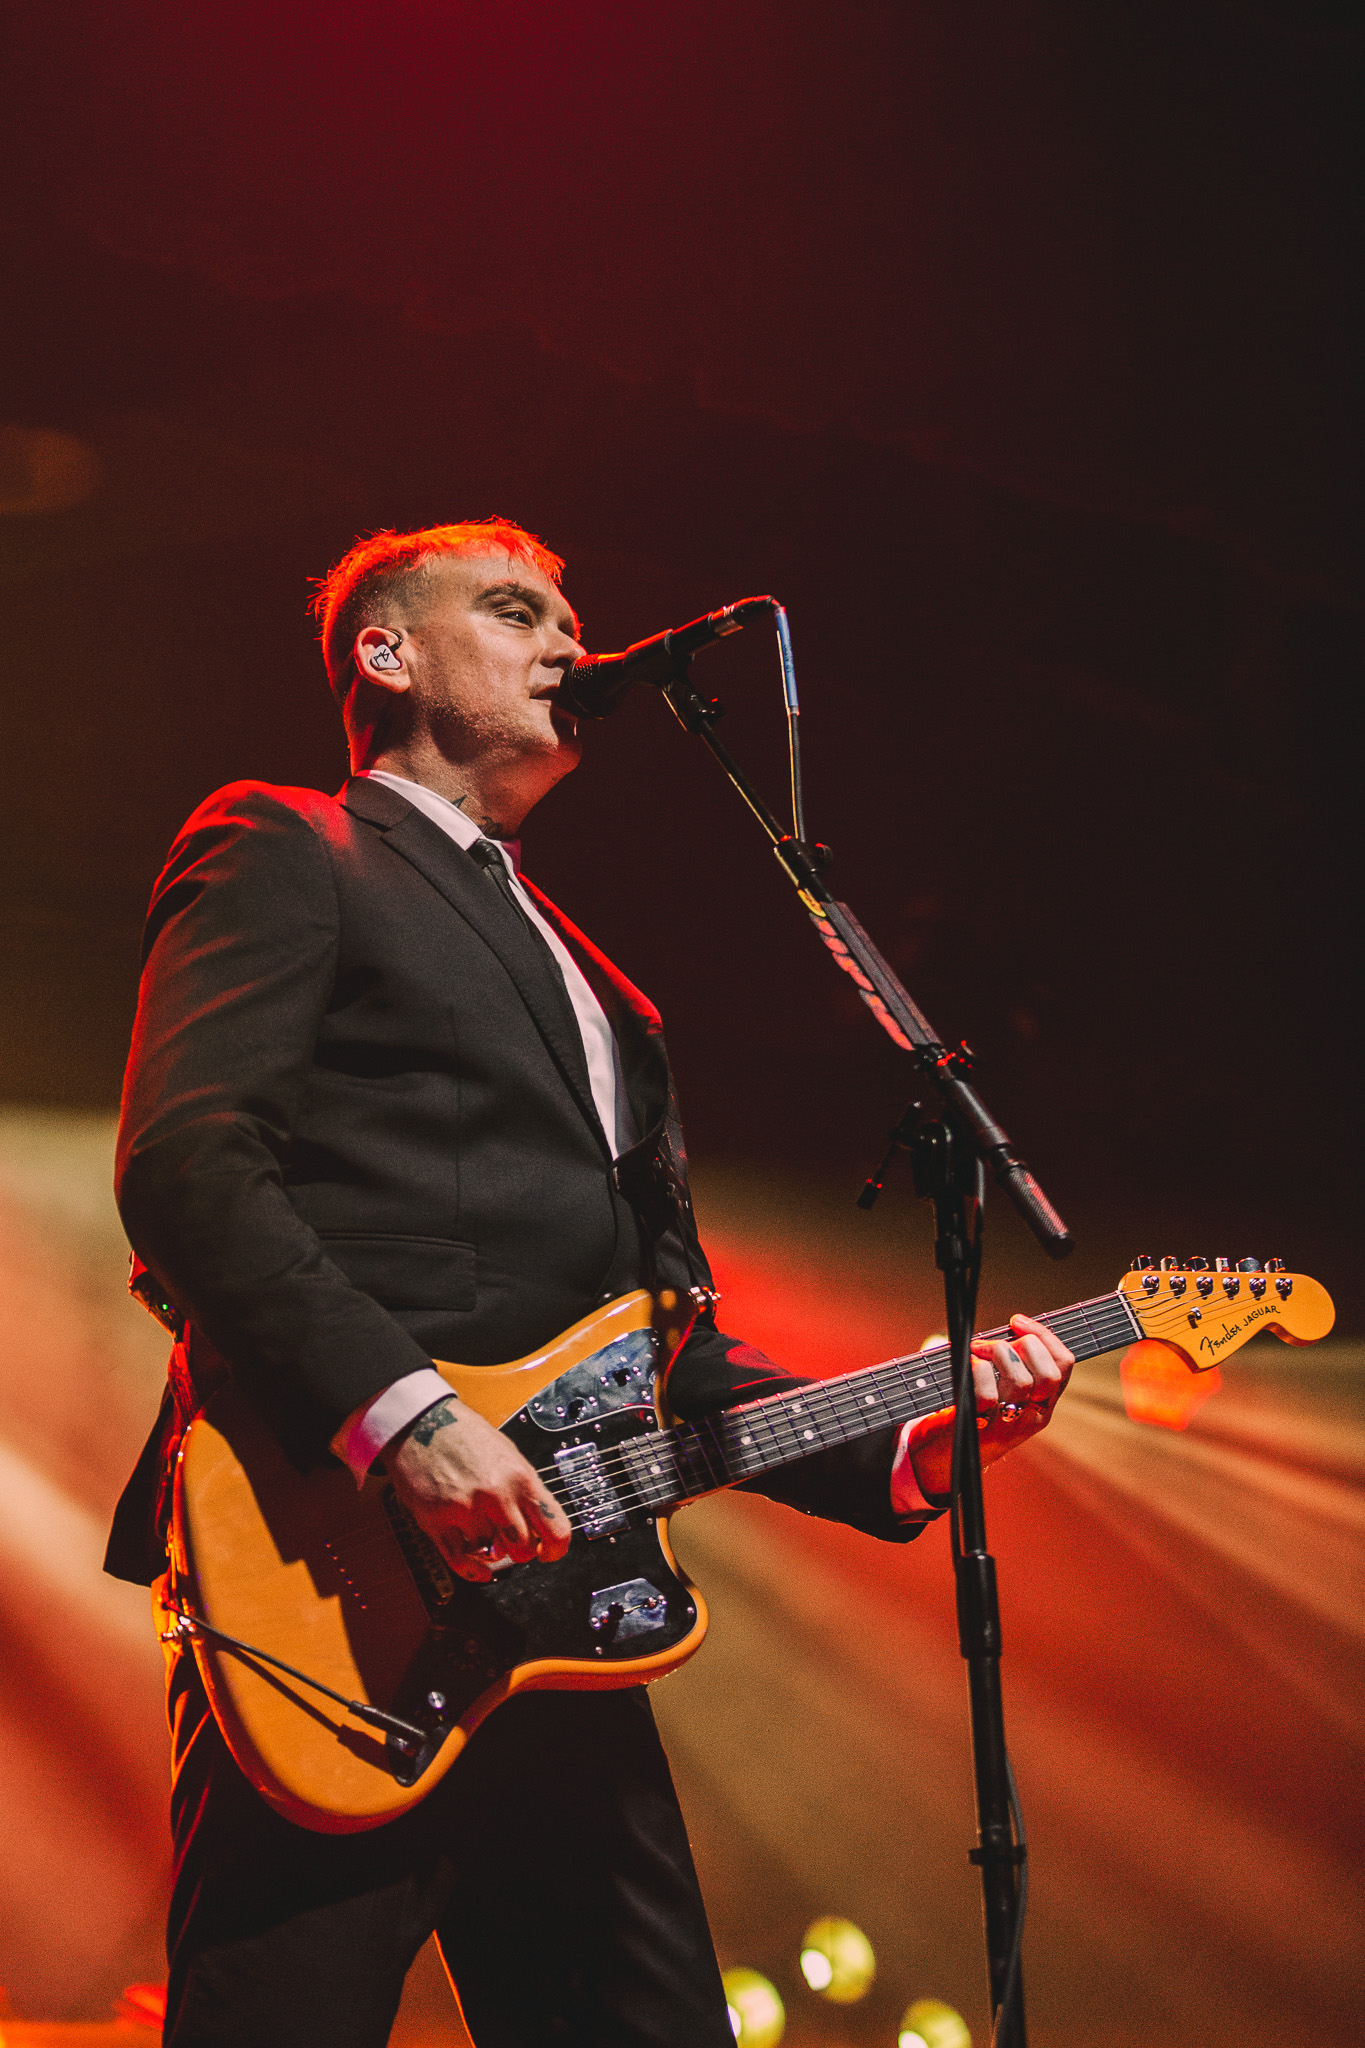 ALKALINE TRIO SELLS OUT HOMETOWN SHOW ON A HISTORIC RUN